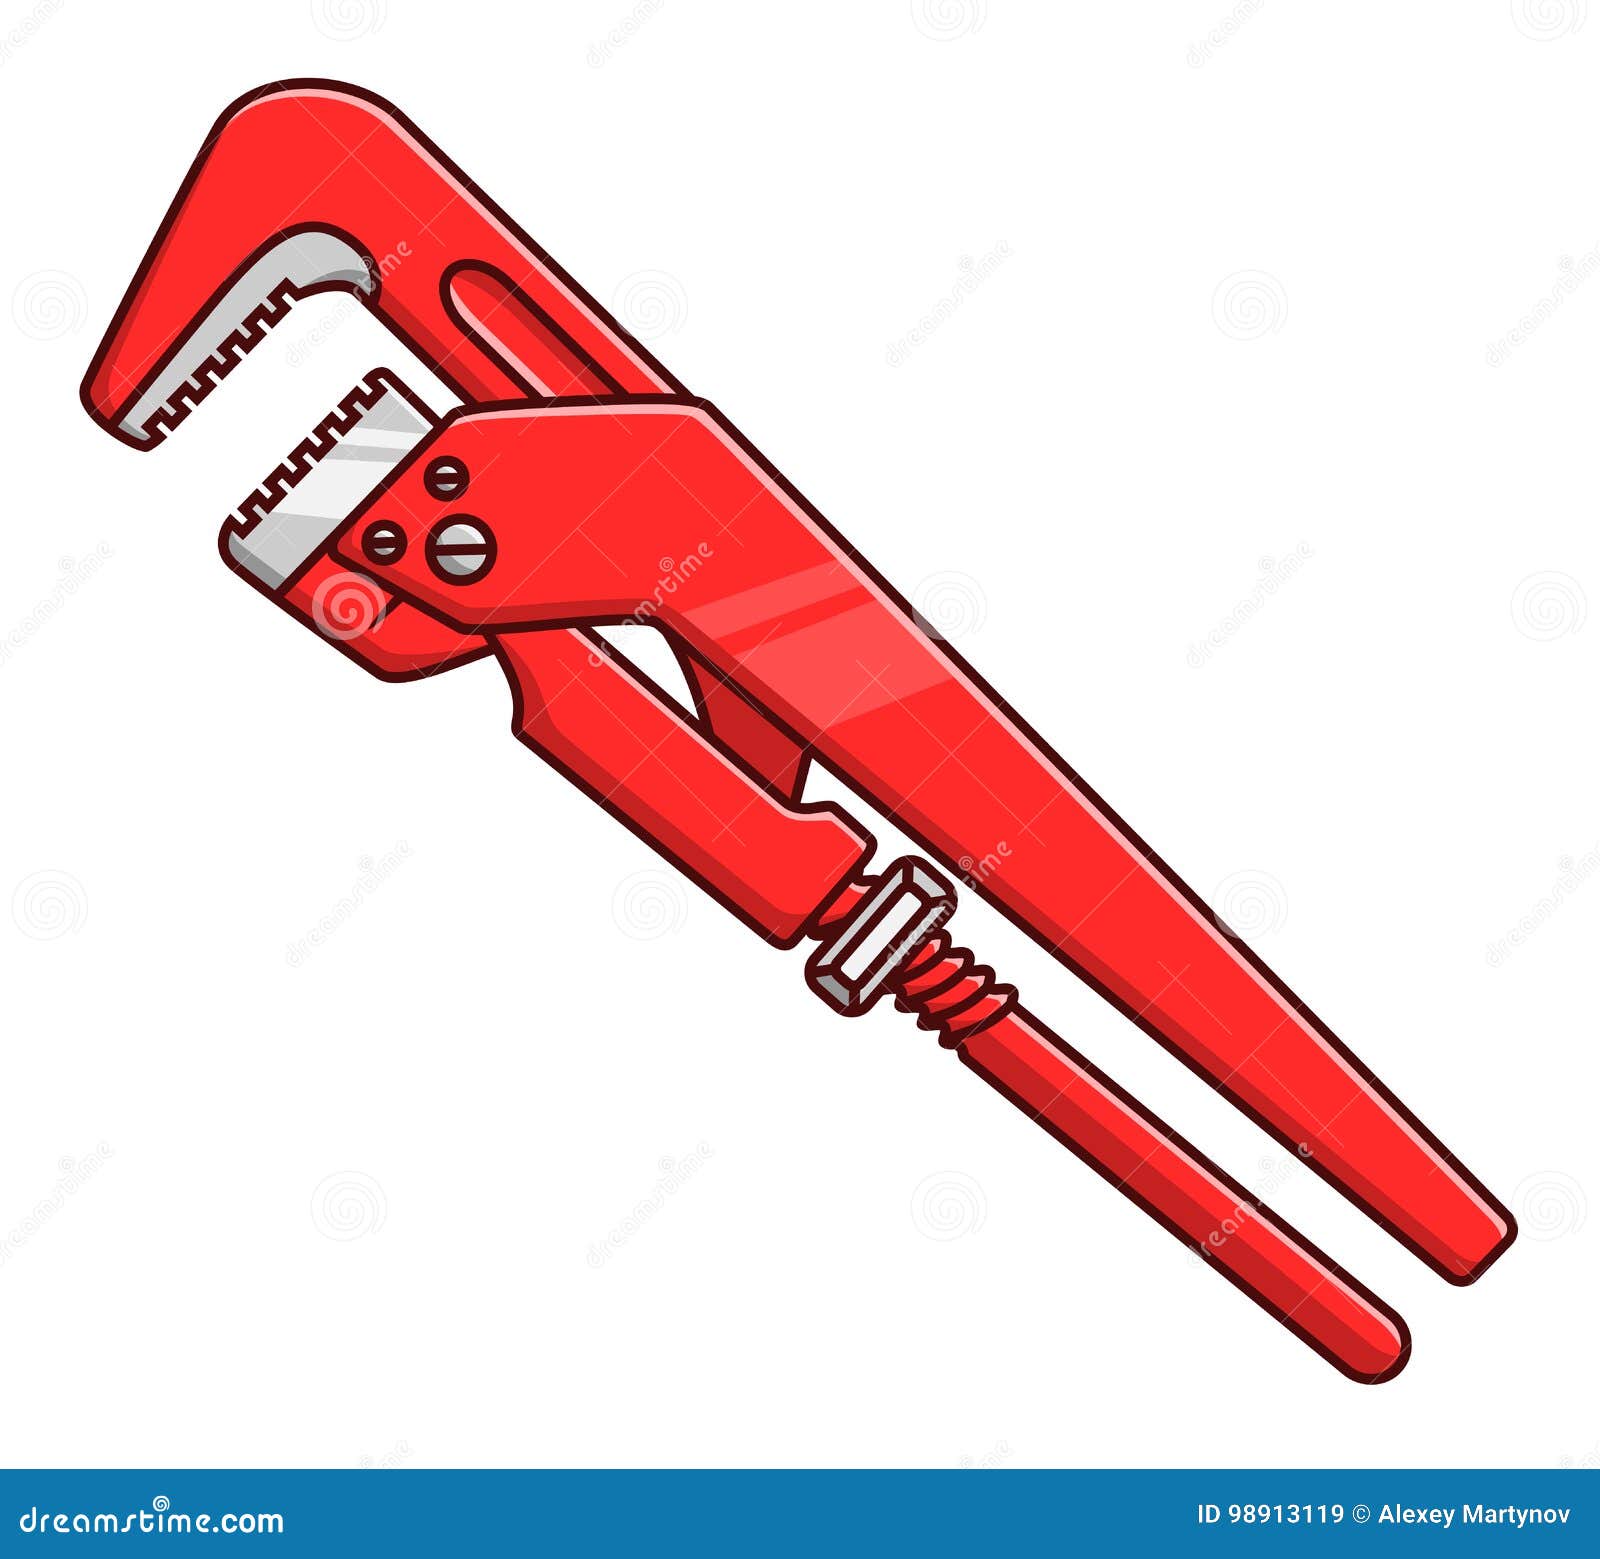 Pipe wrench stock vector. Illustration of construction - 98913119